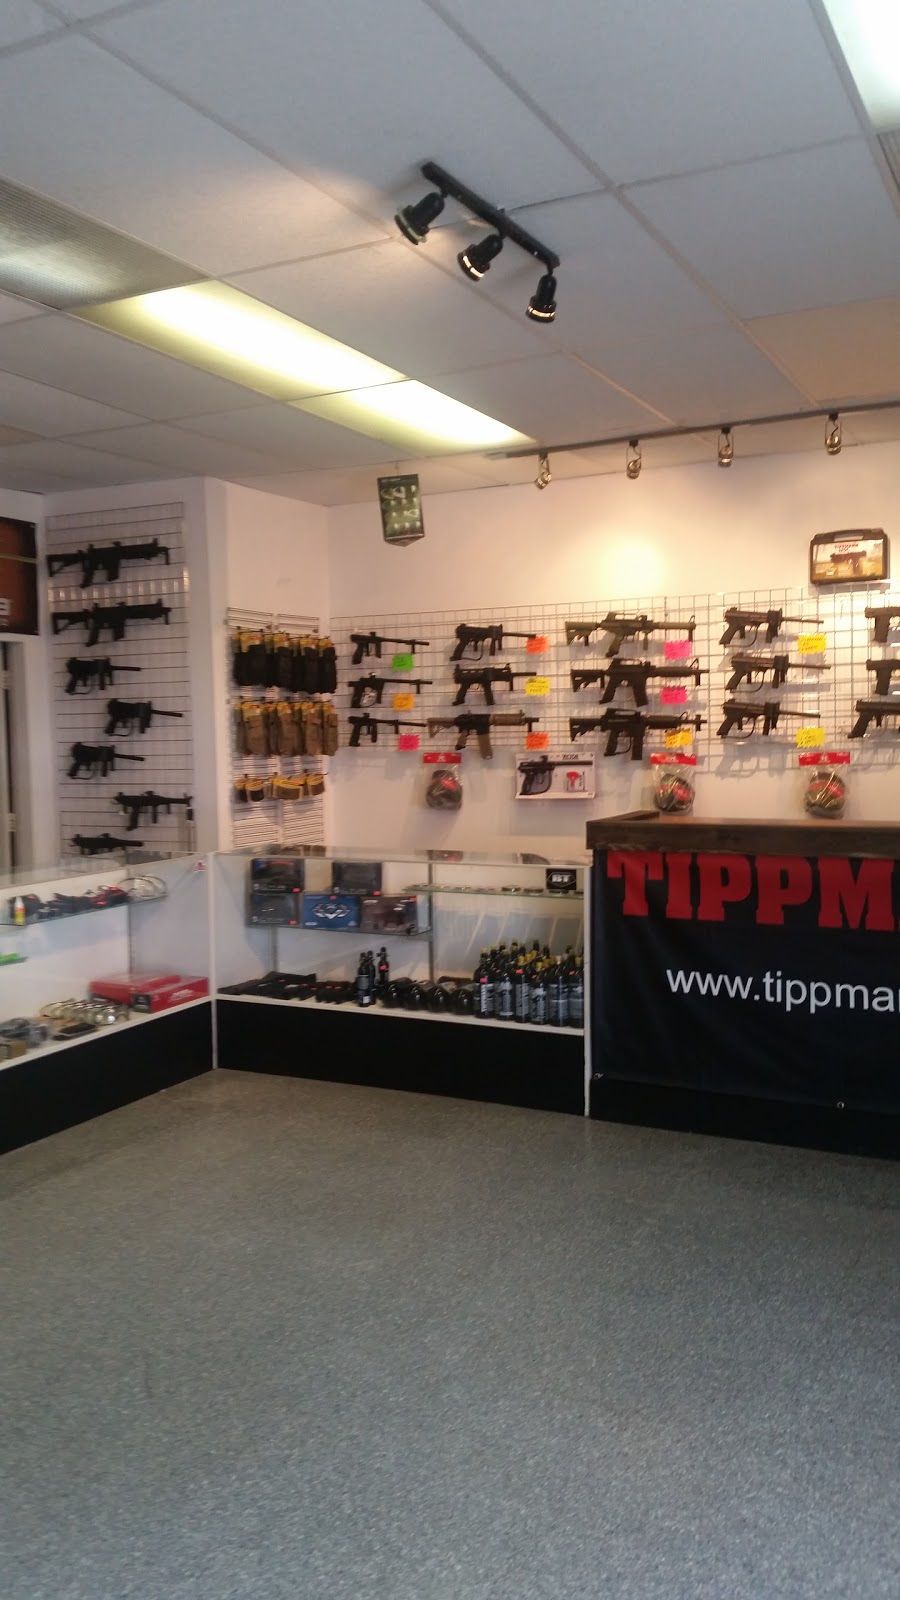 kens magasin paintball | store | 8136 jean-brillon, LaSalle, QC H8N 2J5, Canada | 5143639391 OR +1 514-363-9391